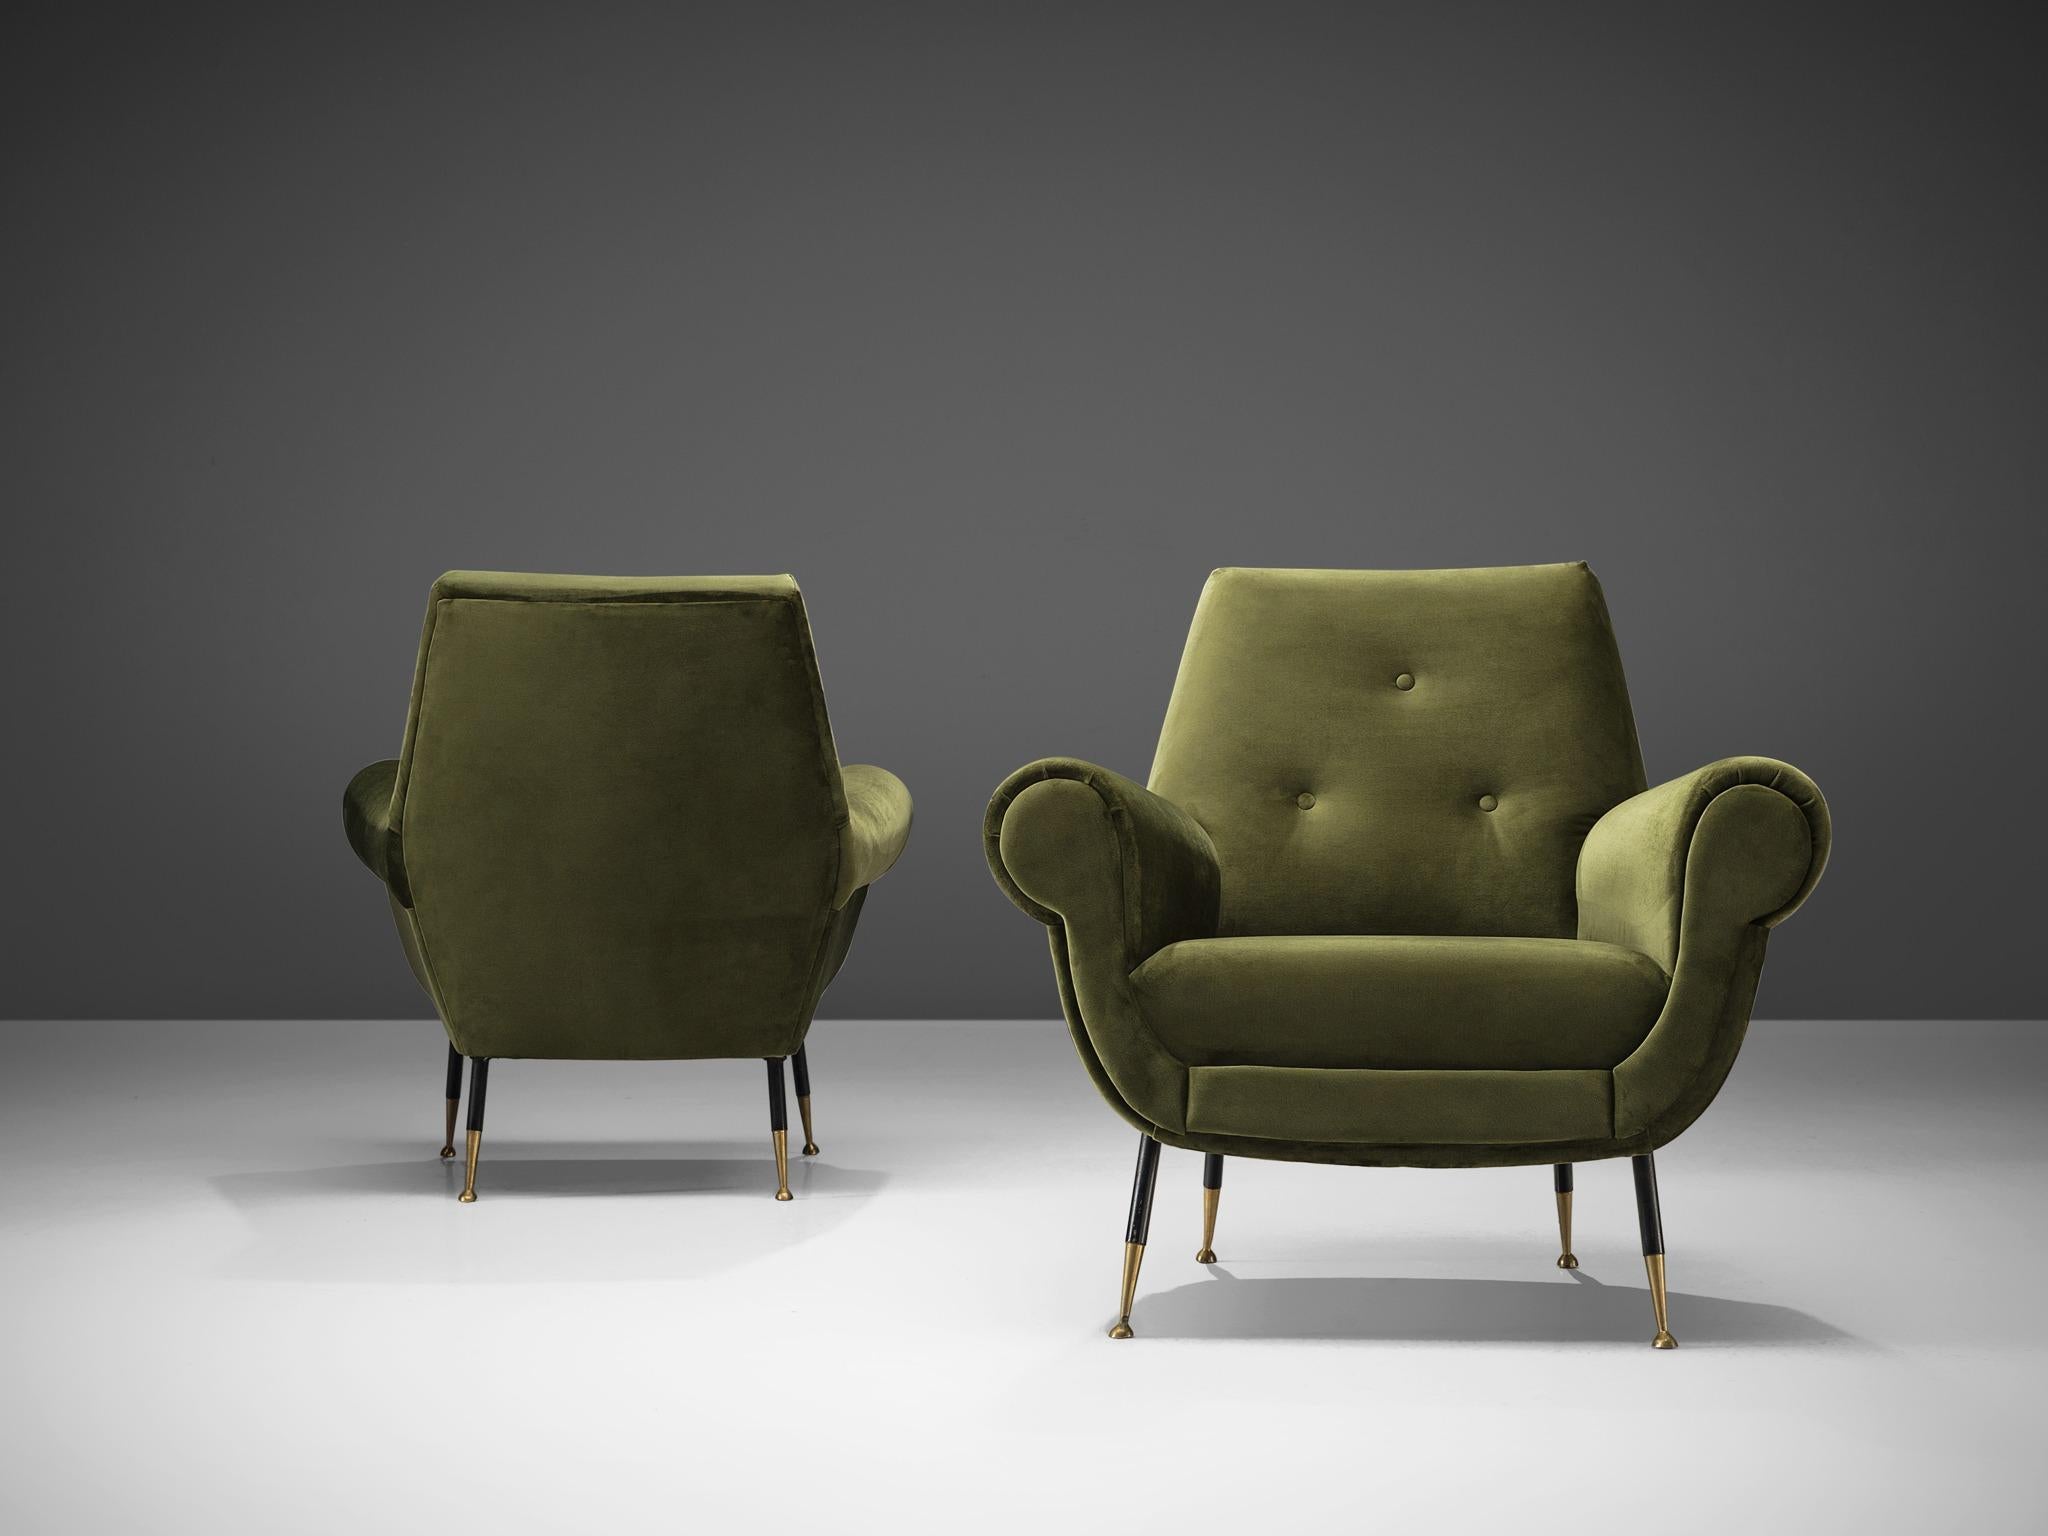 Easy chairs, green velvet, metal, brass, Italy, 1950s

These comfortable easy chairs have thick armrests and are full and rounded. The top is flat and the sides are curved and thick, featuring Classic, traditional details. For instance the